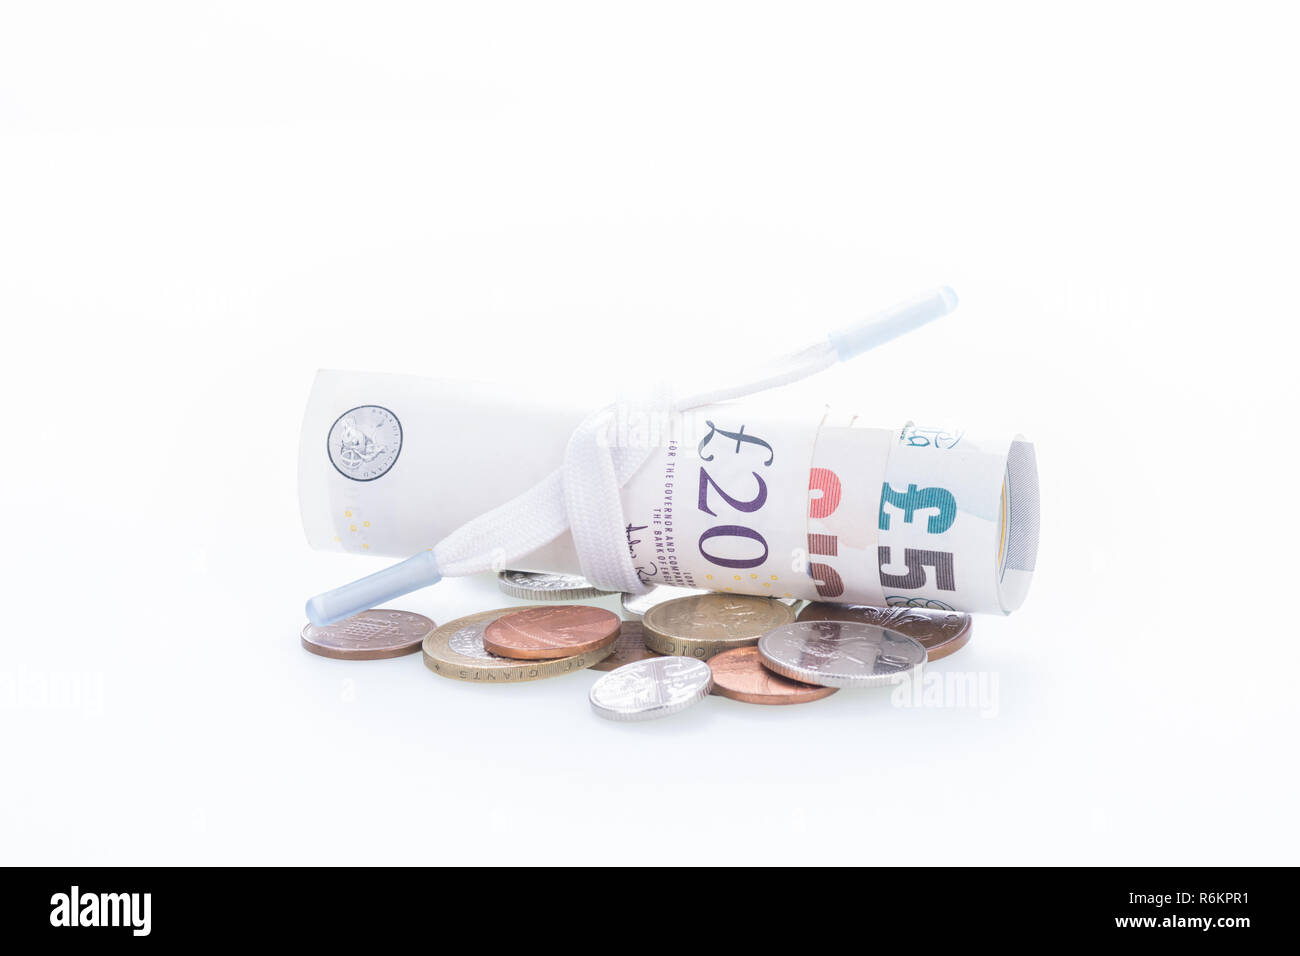 Shoestring budget concept Stock Photo